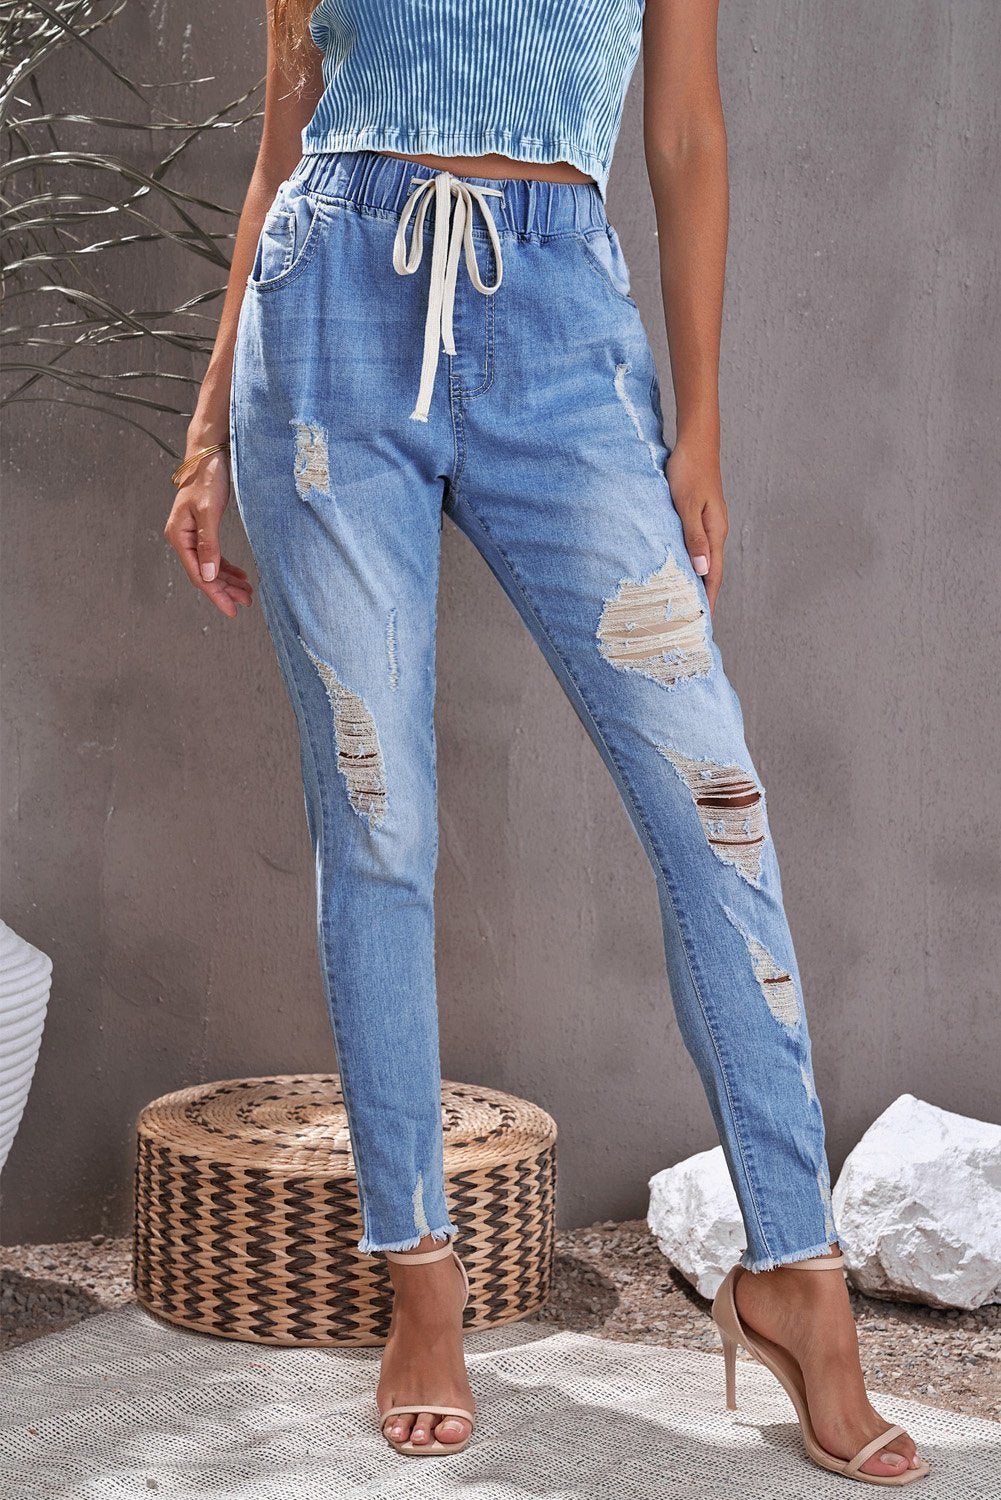 Blue Drawstring Elastic Waist Hole Ripped Jean - All Good Laces